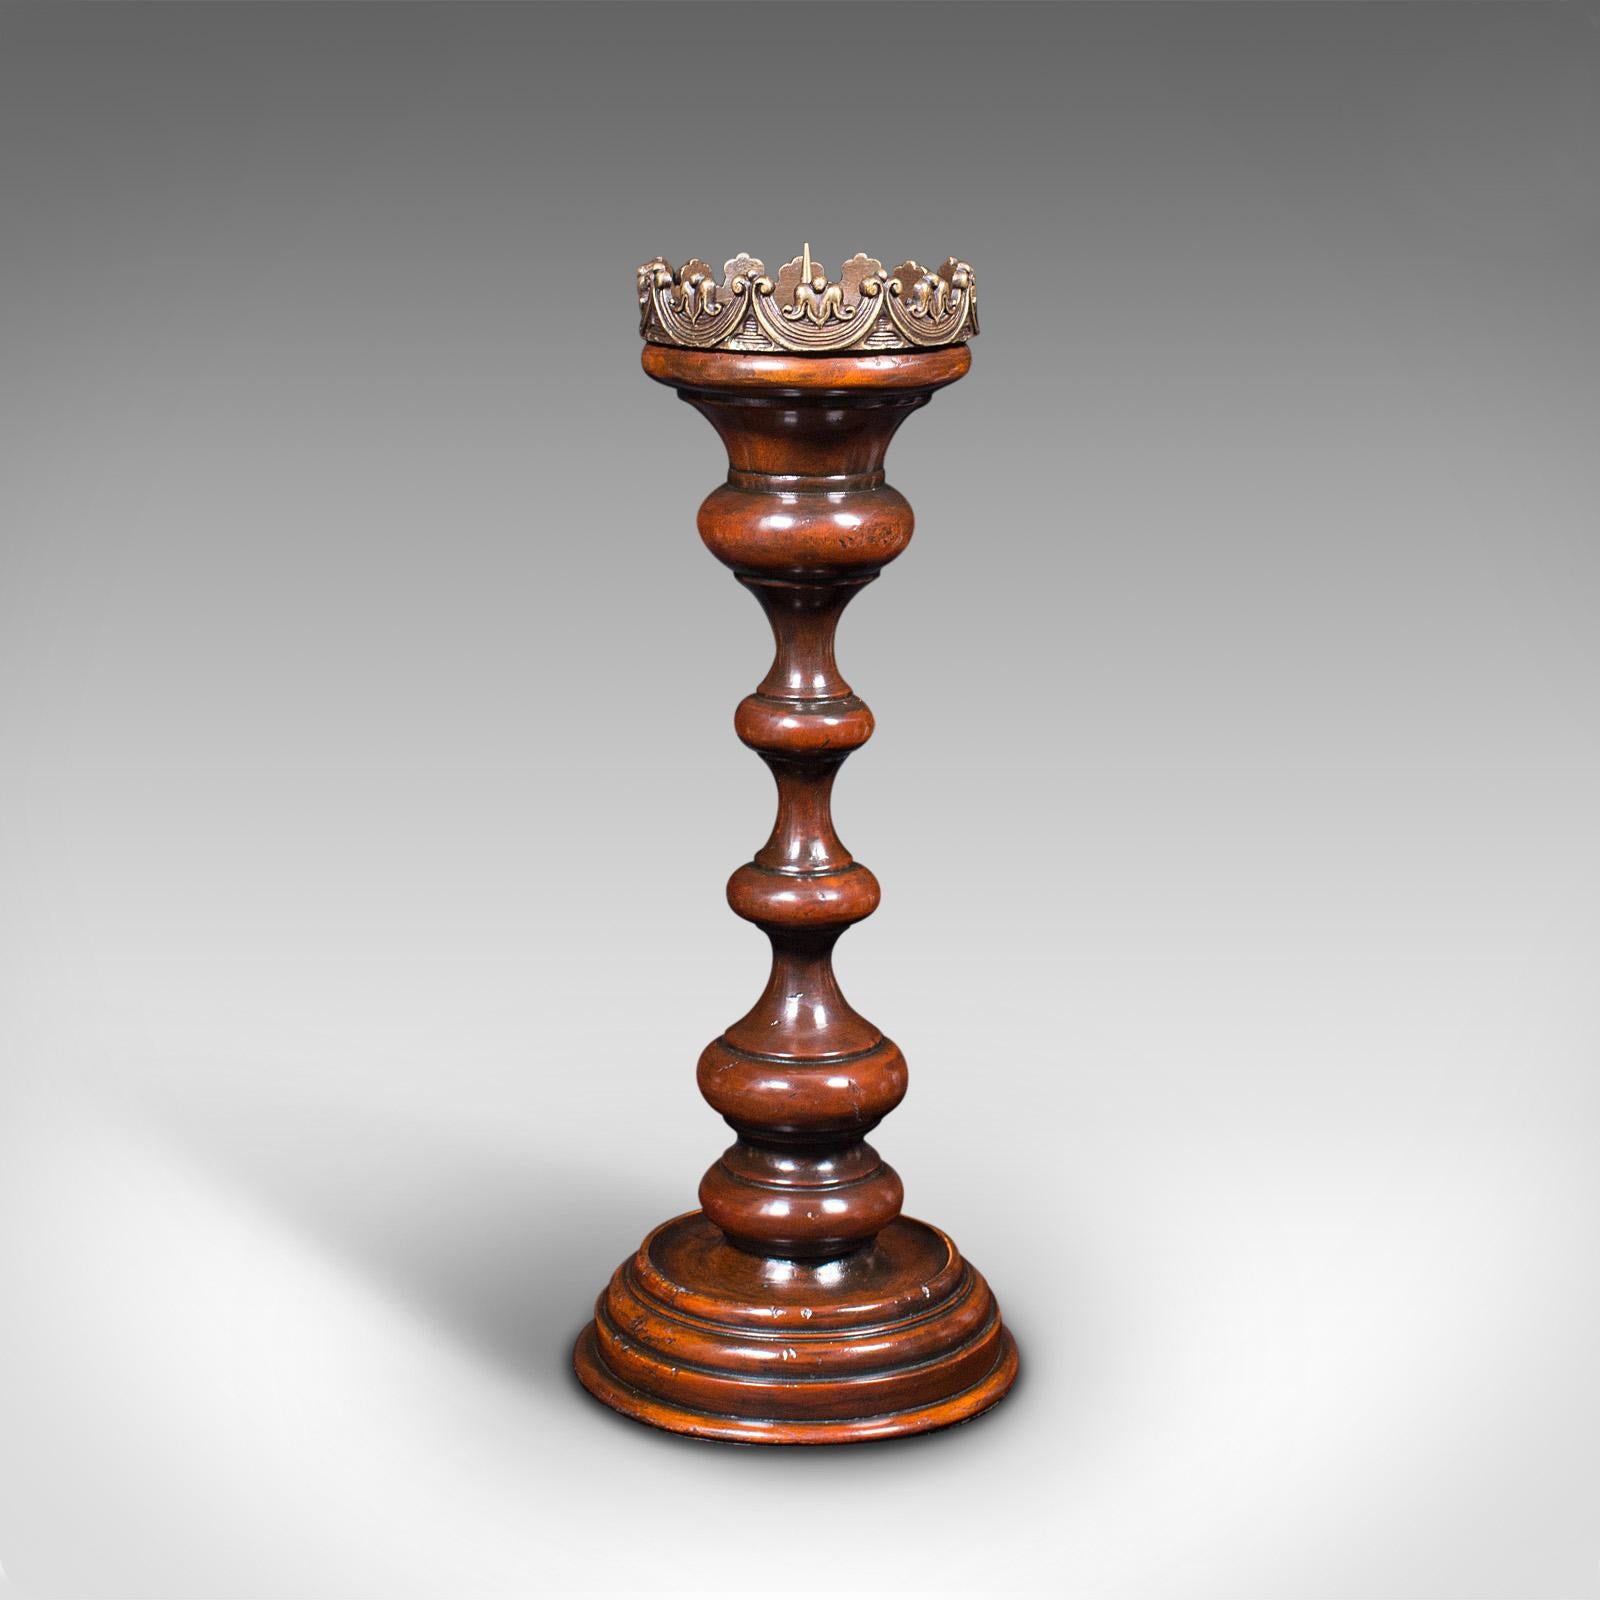 This is a tall vintage centrepiece torchere. A French, beech candlestick with ecclesiastical taste, dating to the mid 20th century, circa 1960.

Skilfully turned torchere for illuminating intimate gatherings
Displays a desirable aged patina and